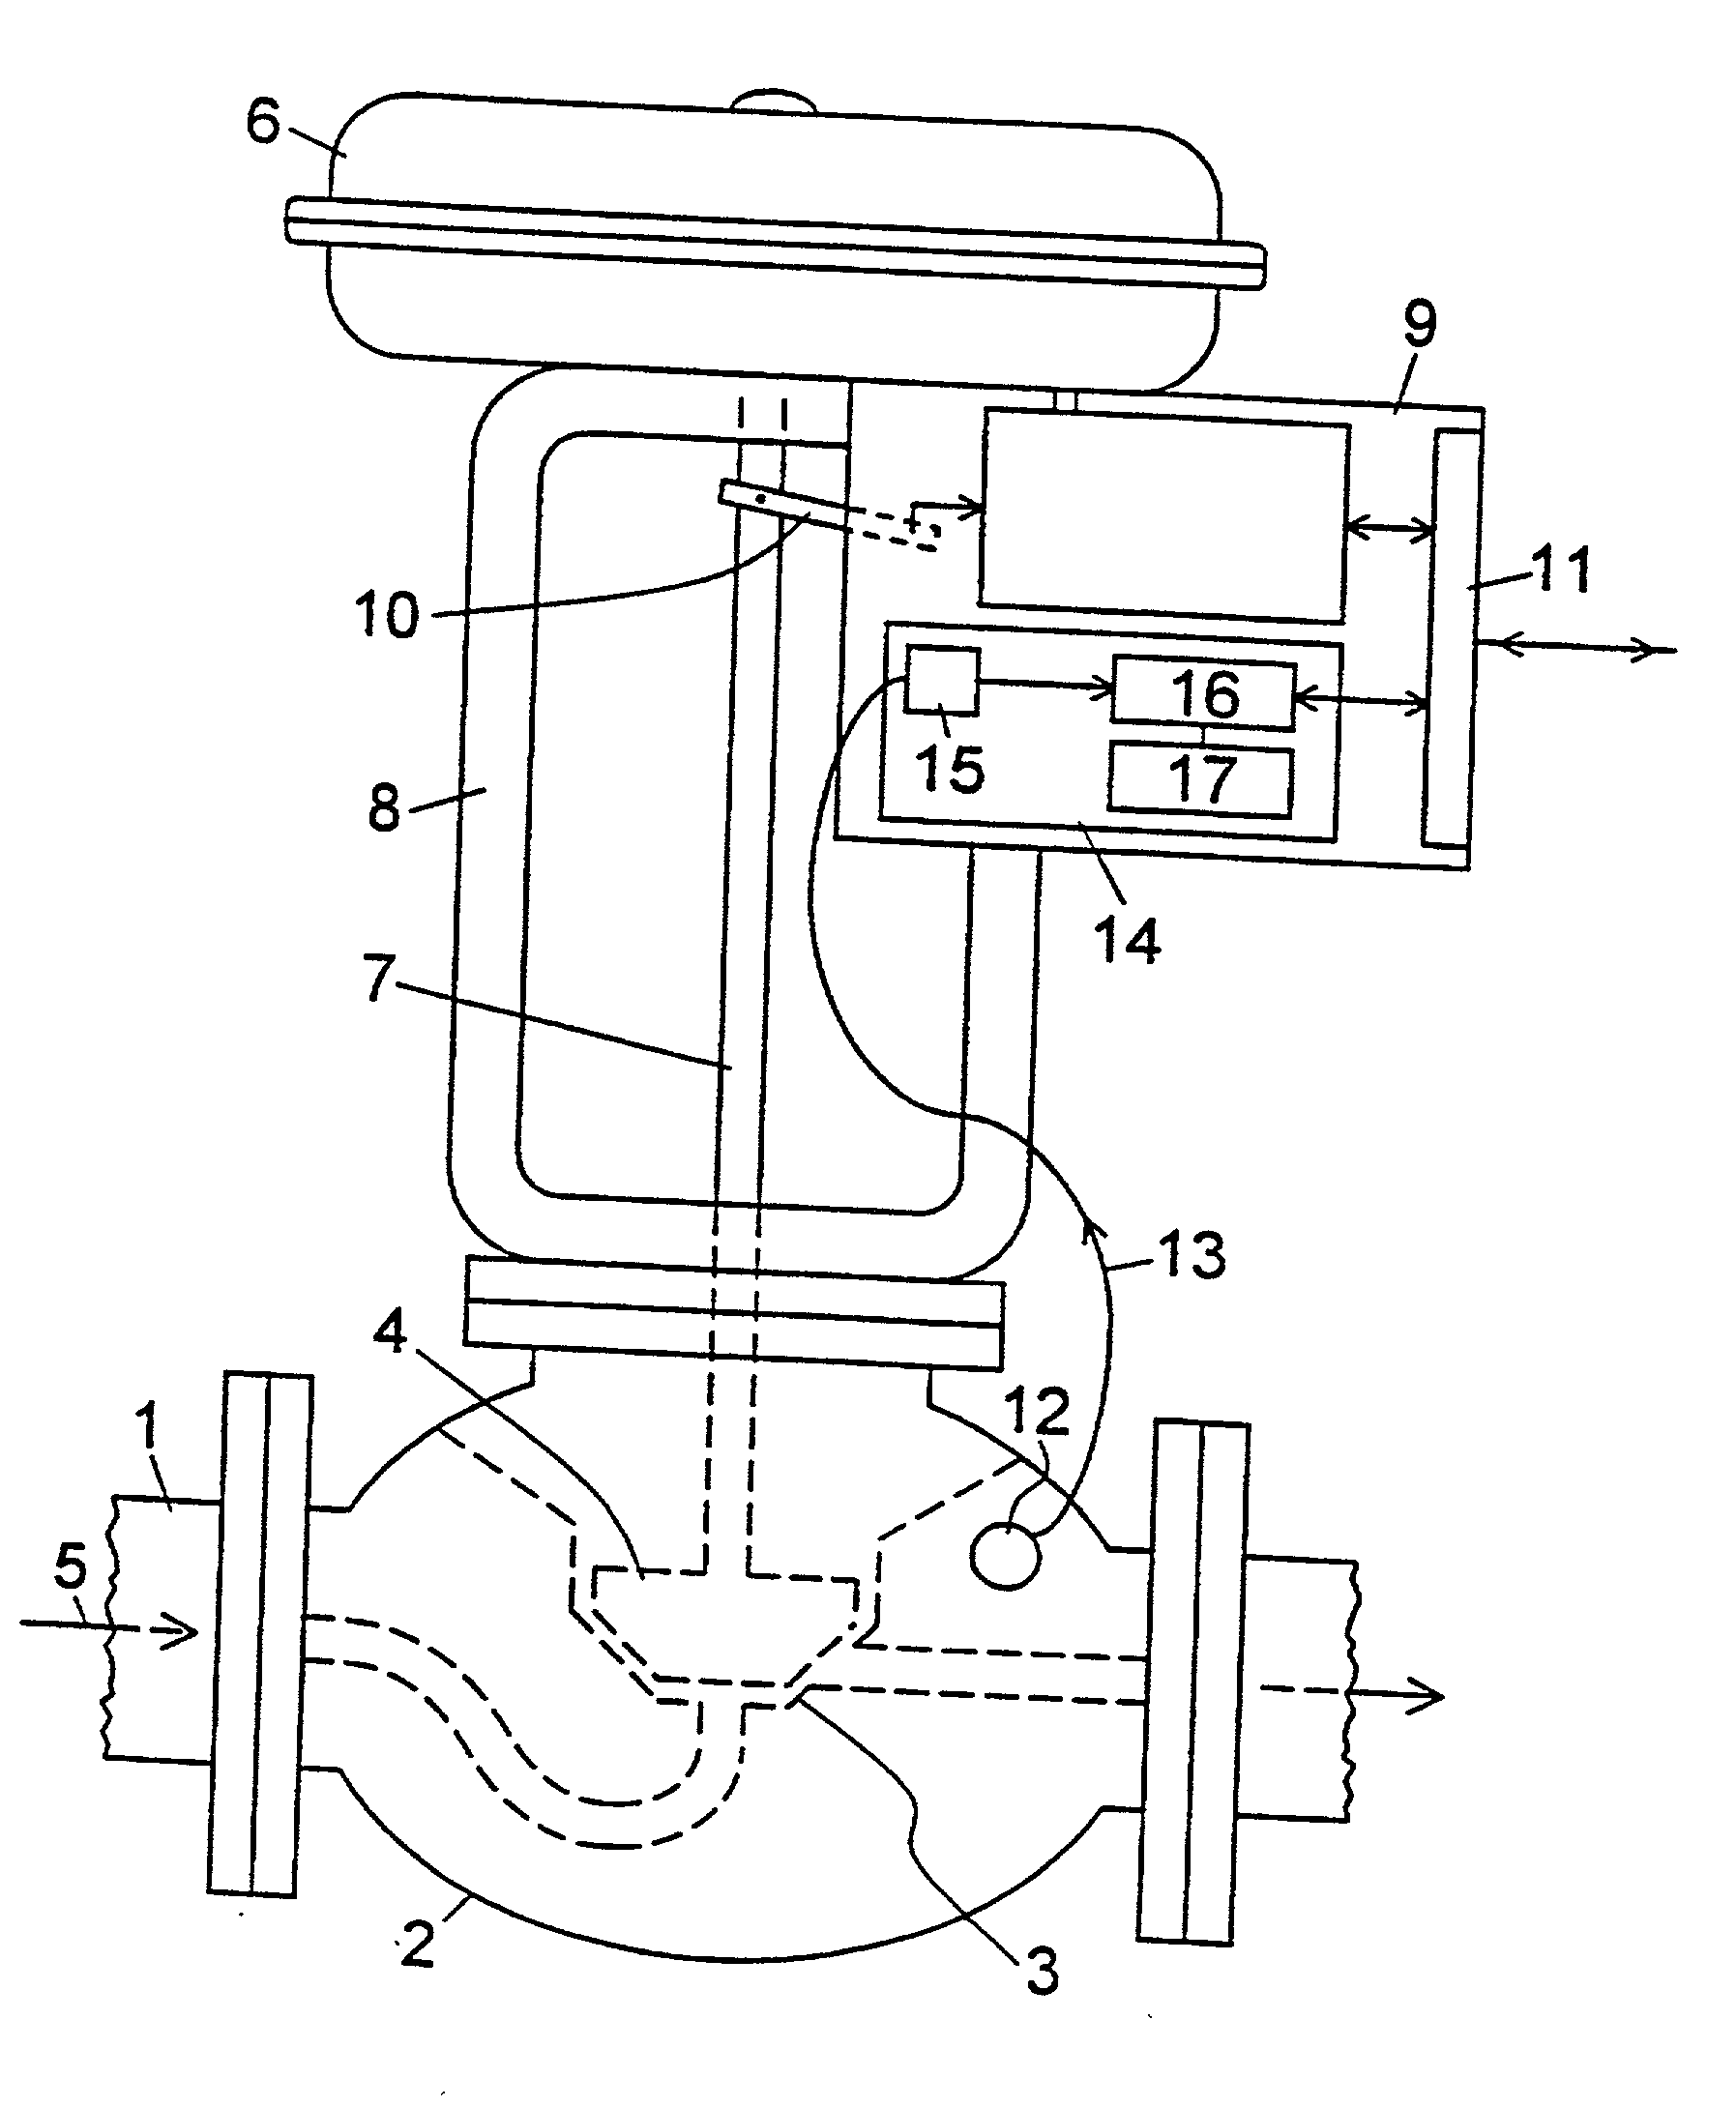 Diagnostic system for a valve that can be actuated by a position controller via a drive